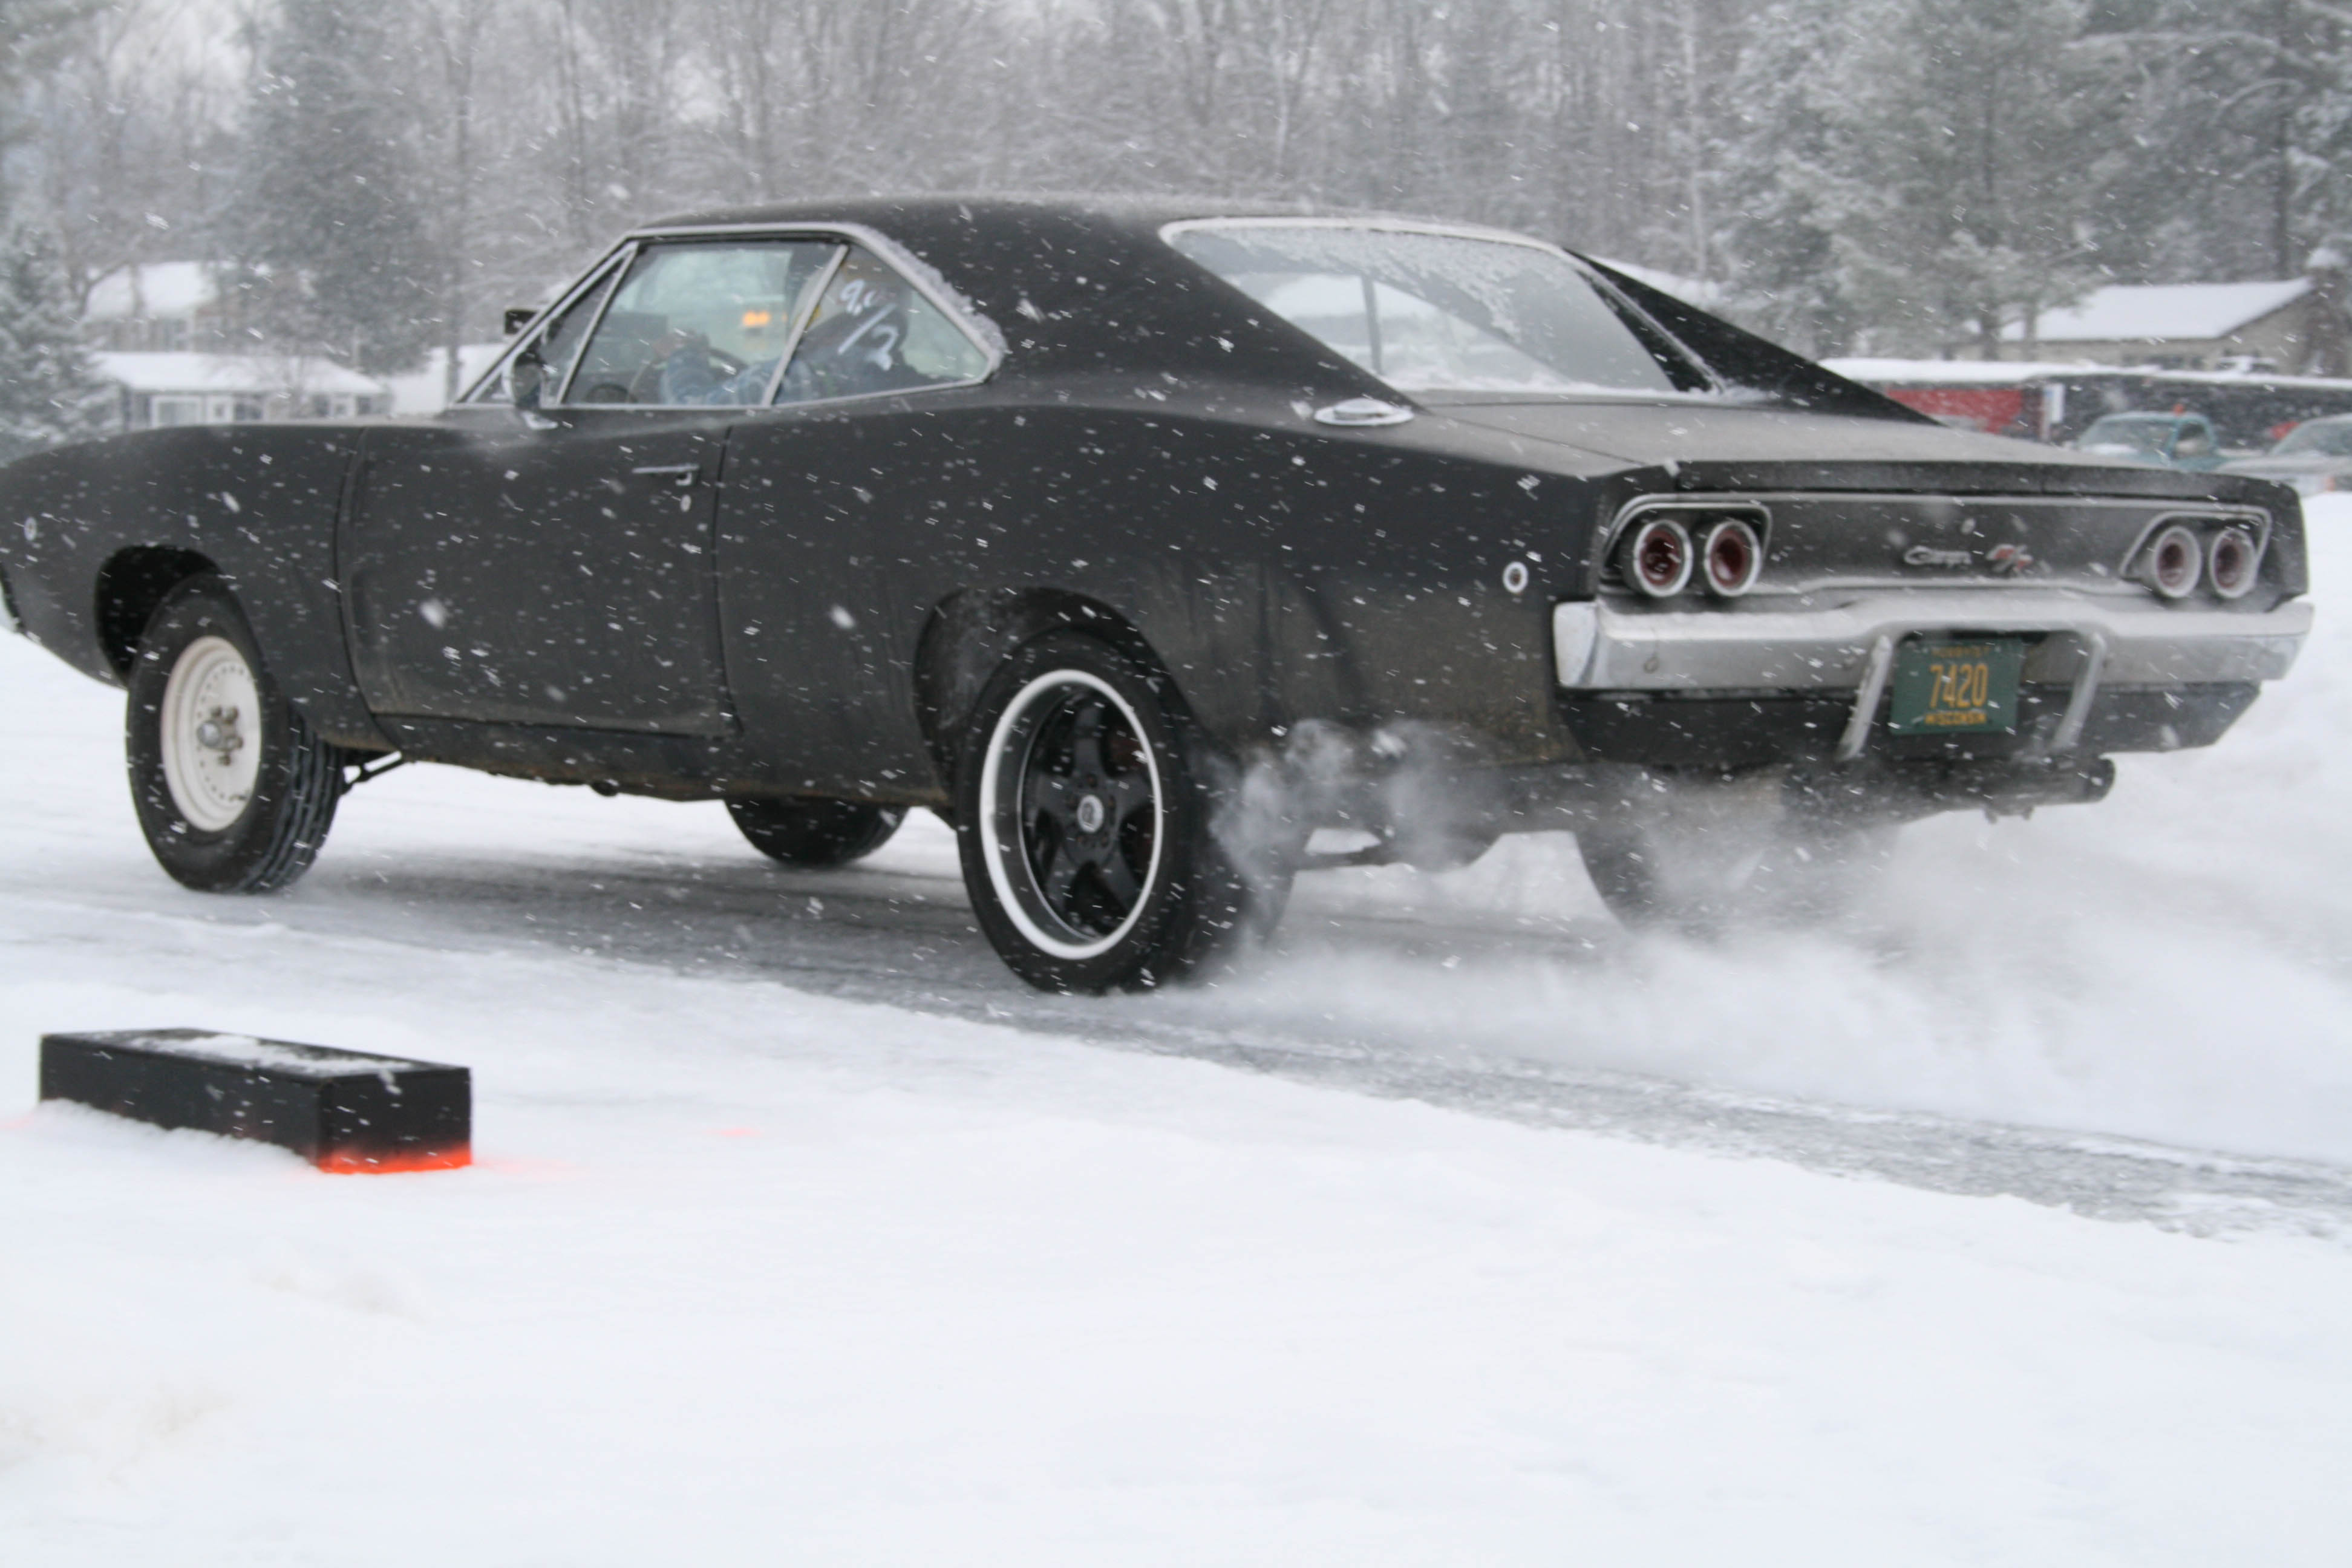 hot, Rod, Rods, Drag, Racing, Race, Dodge, Charger, Winter, Snow Wallpaper